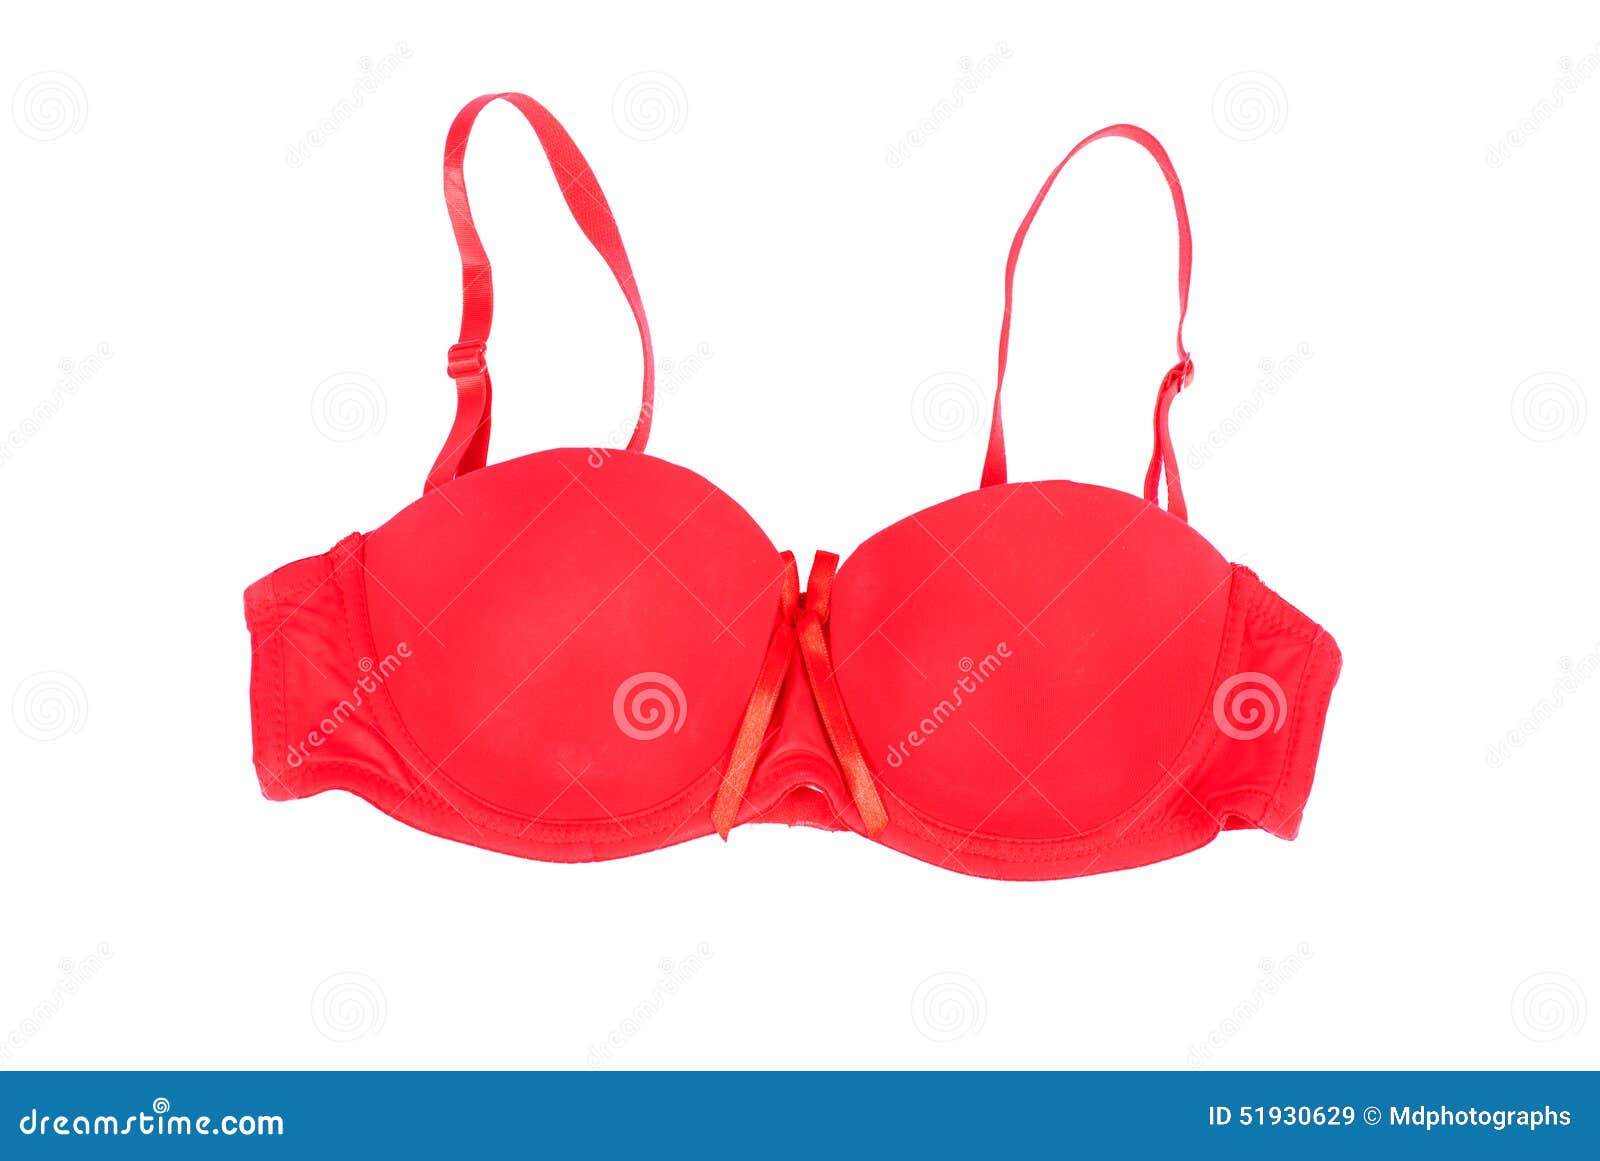 Red bra isolated on white stock image. Image of vibrant - 51930629